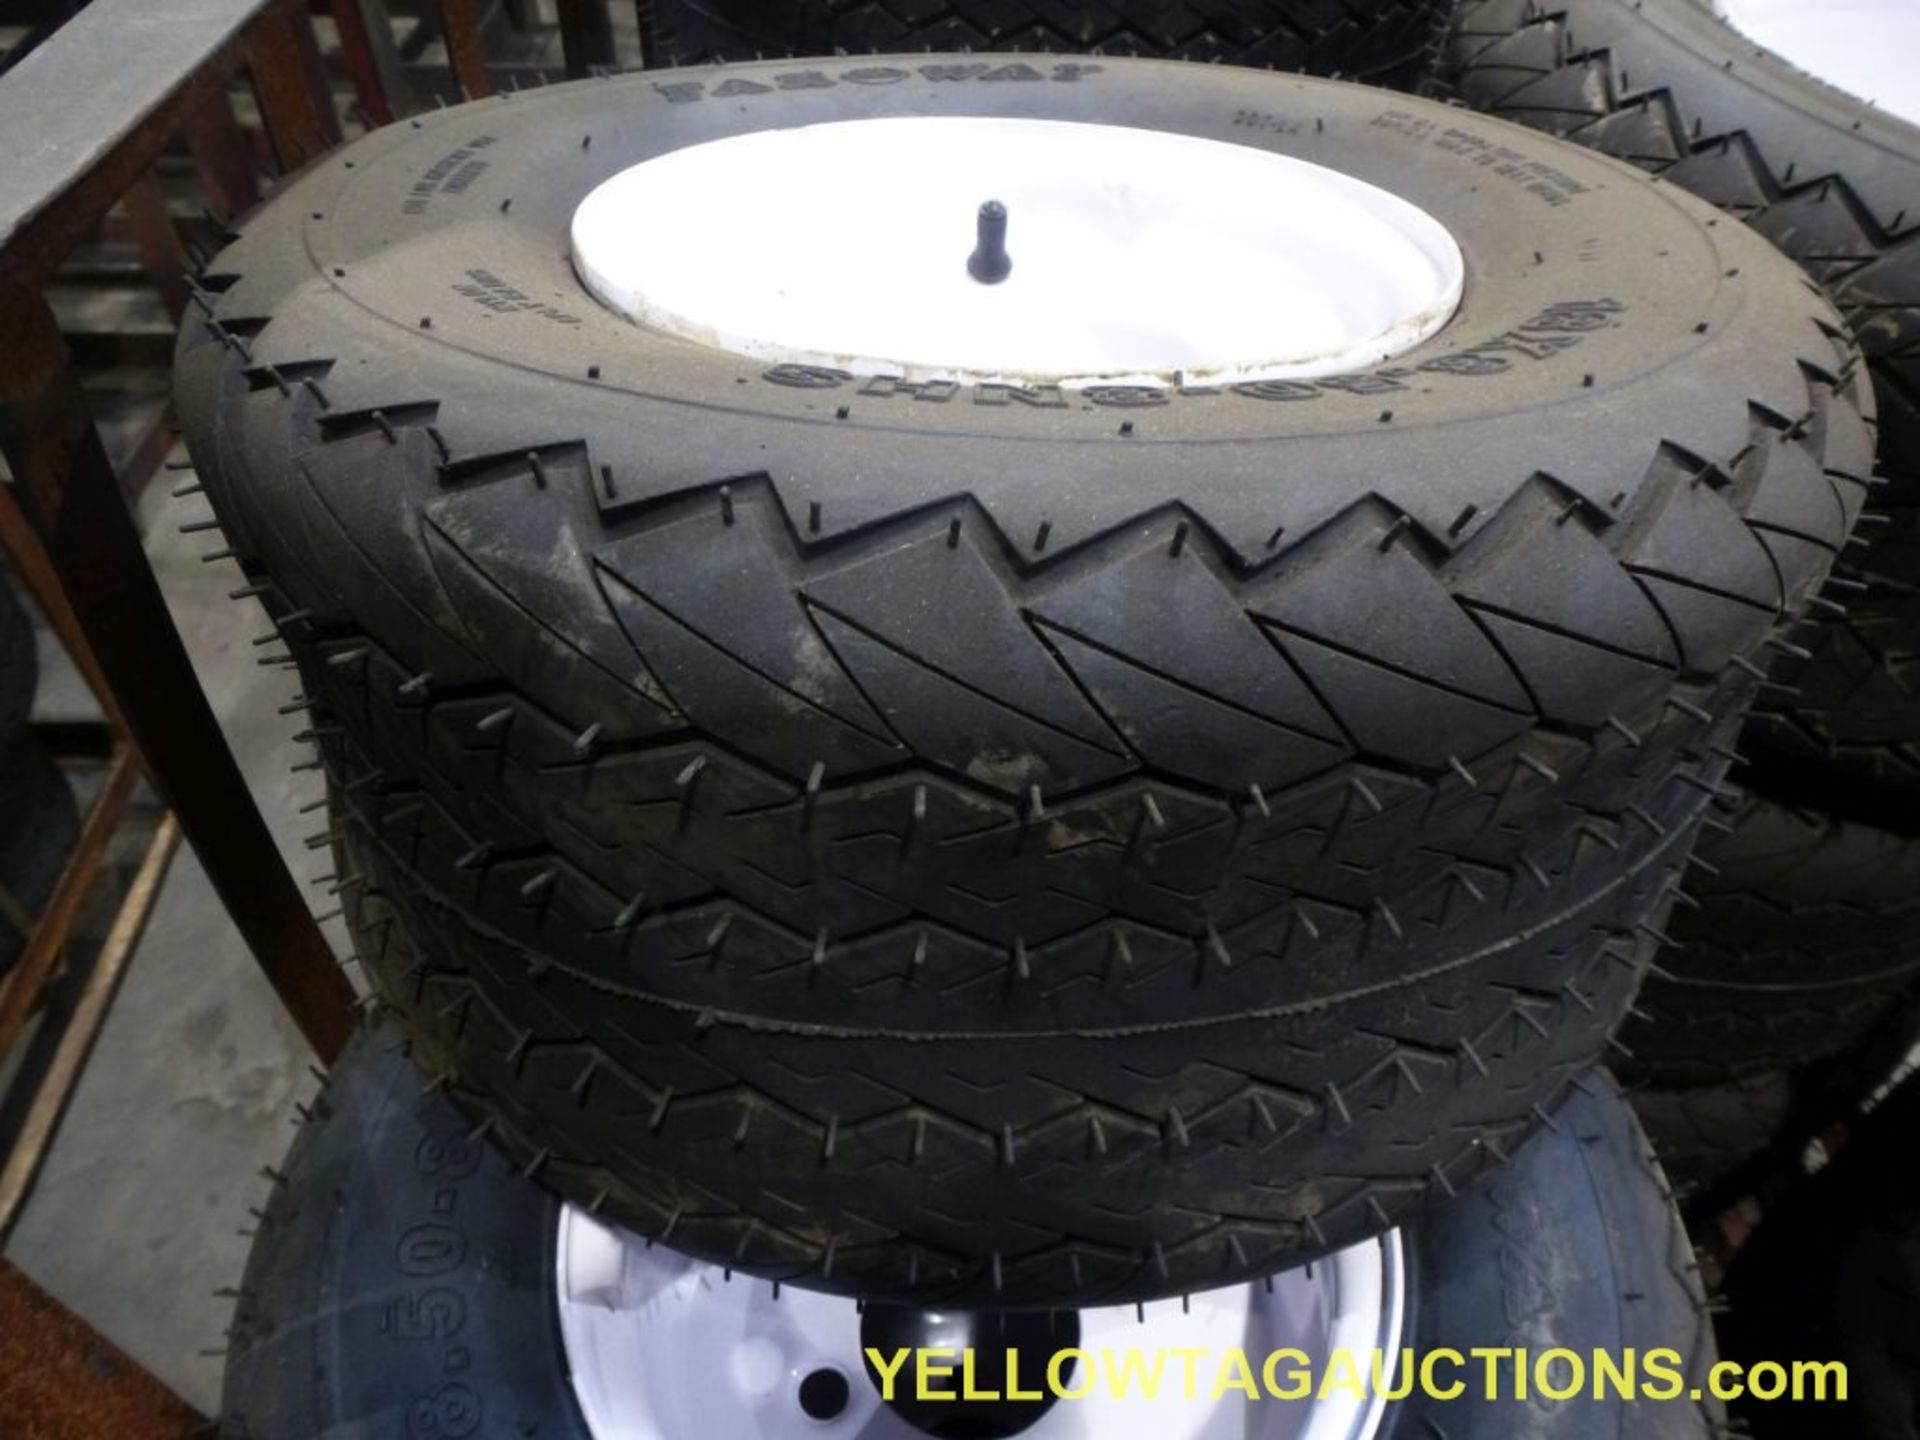 Lot of (25) FarWay 6-Ply Nylon Tires & Wheels|18 X 8.50 - 8NHS|Tag: 406 - Image 3 of 7